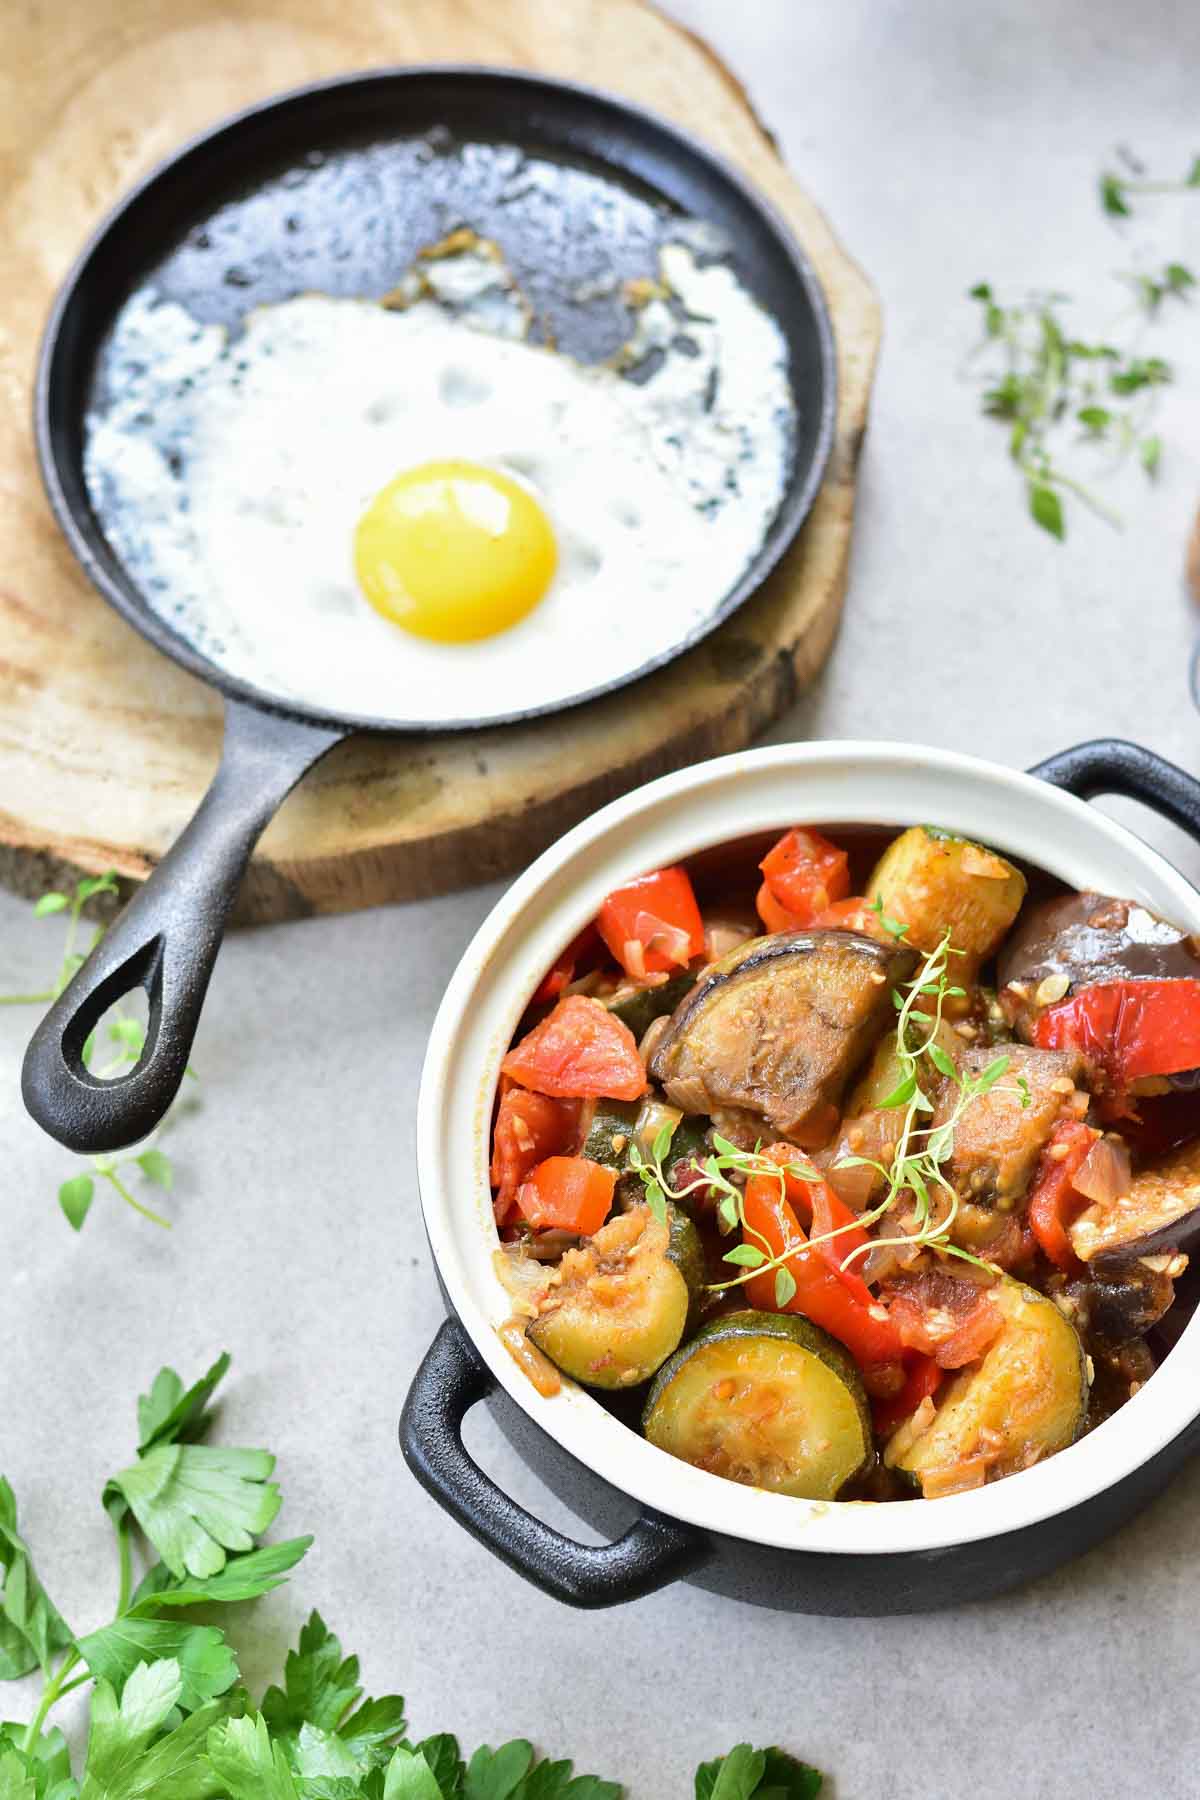 Ratatouille Recipe - French summer vegetable stew